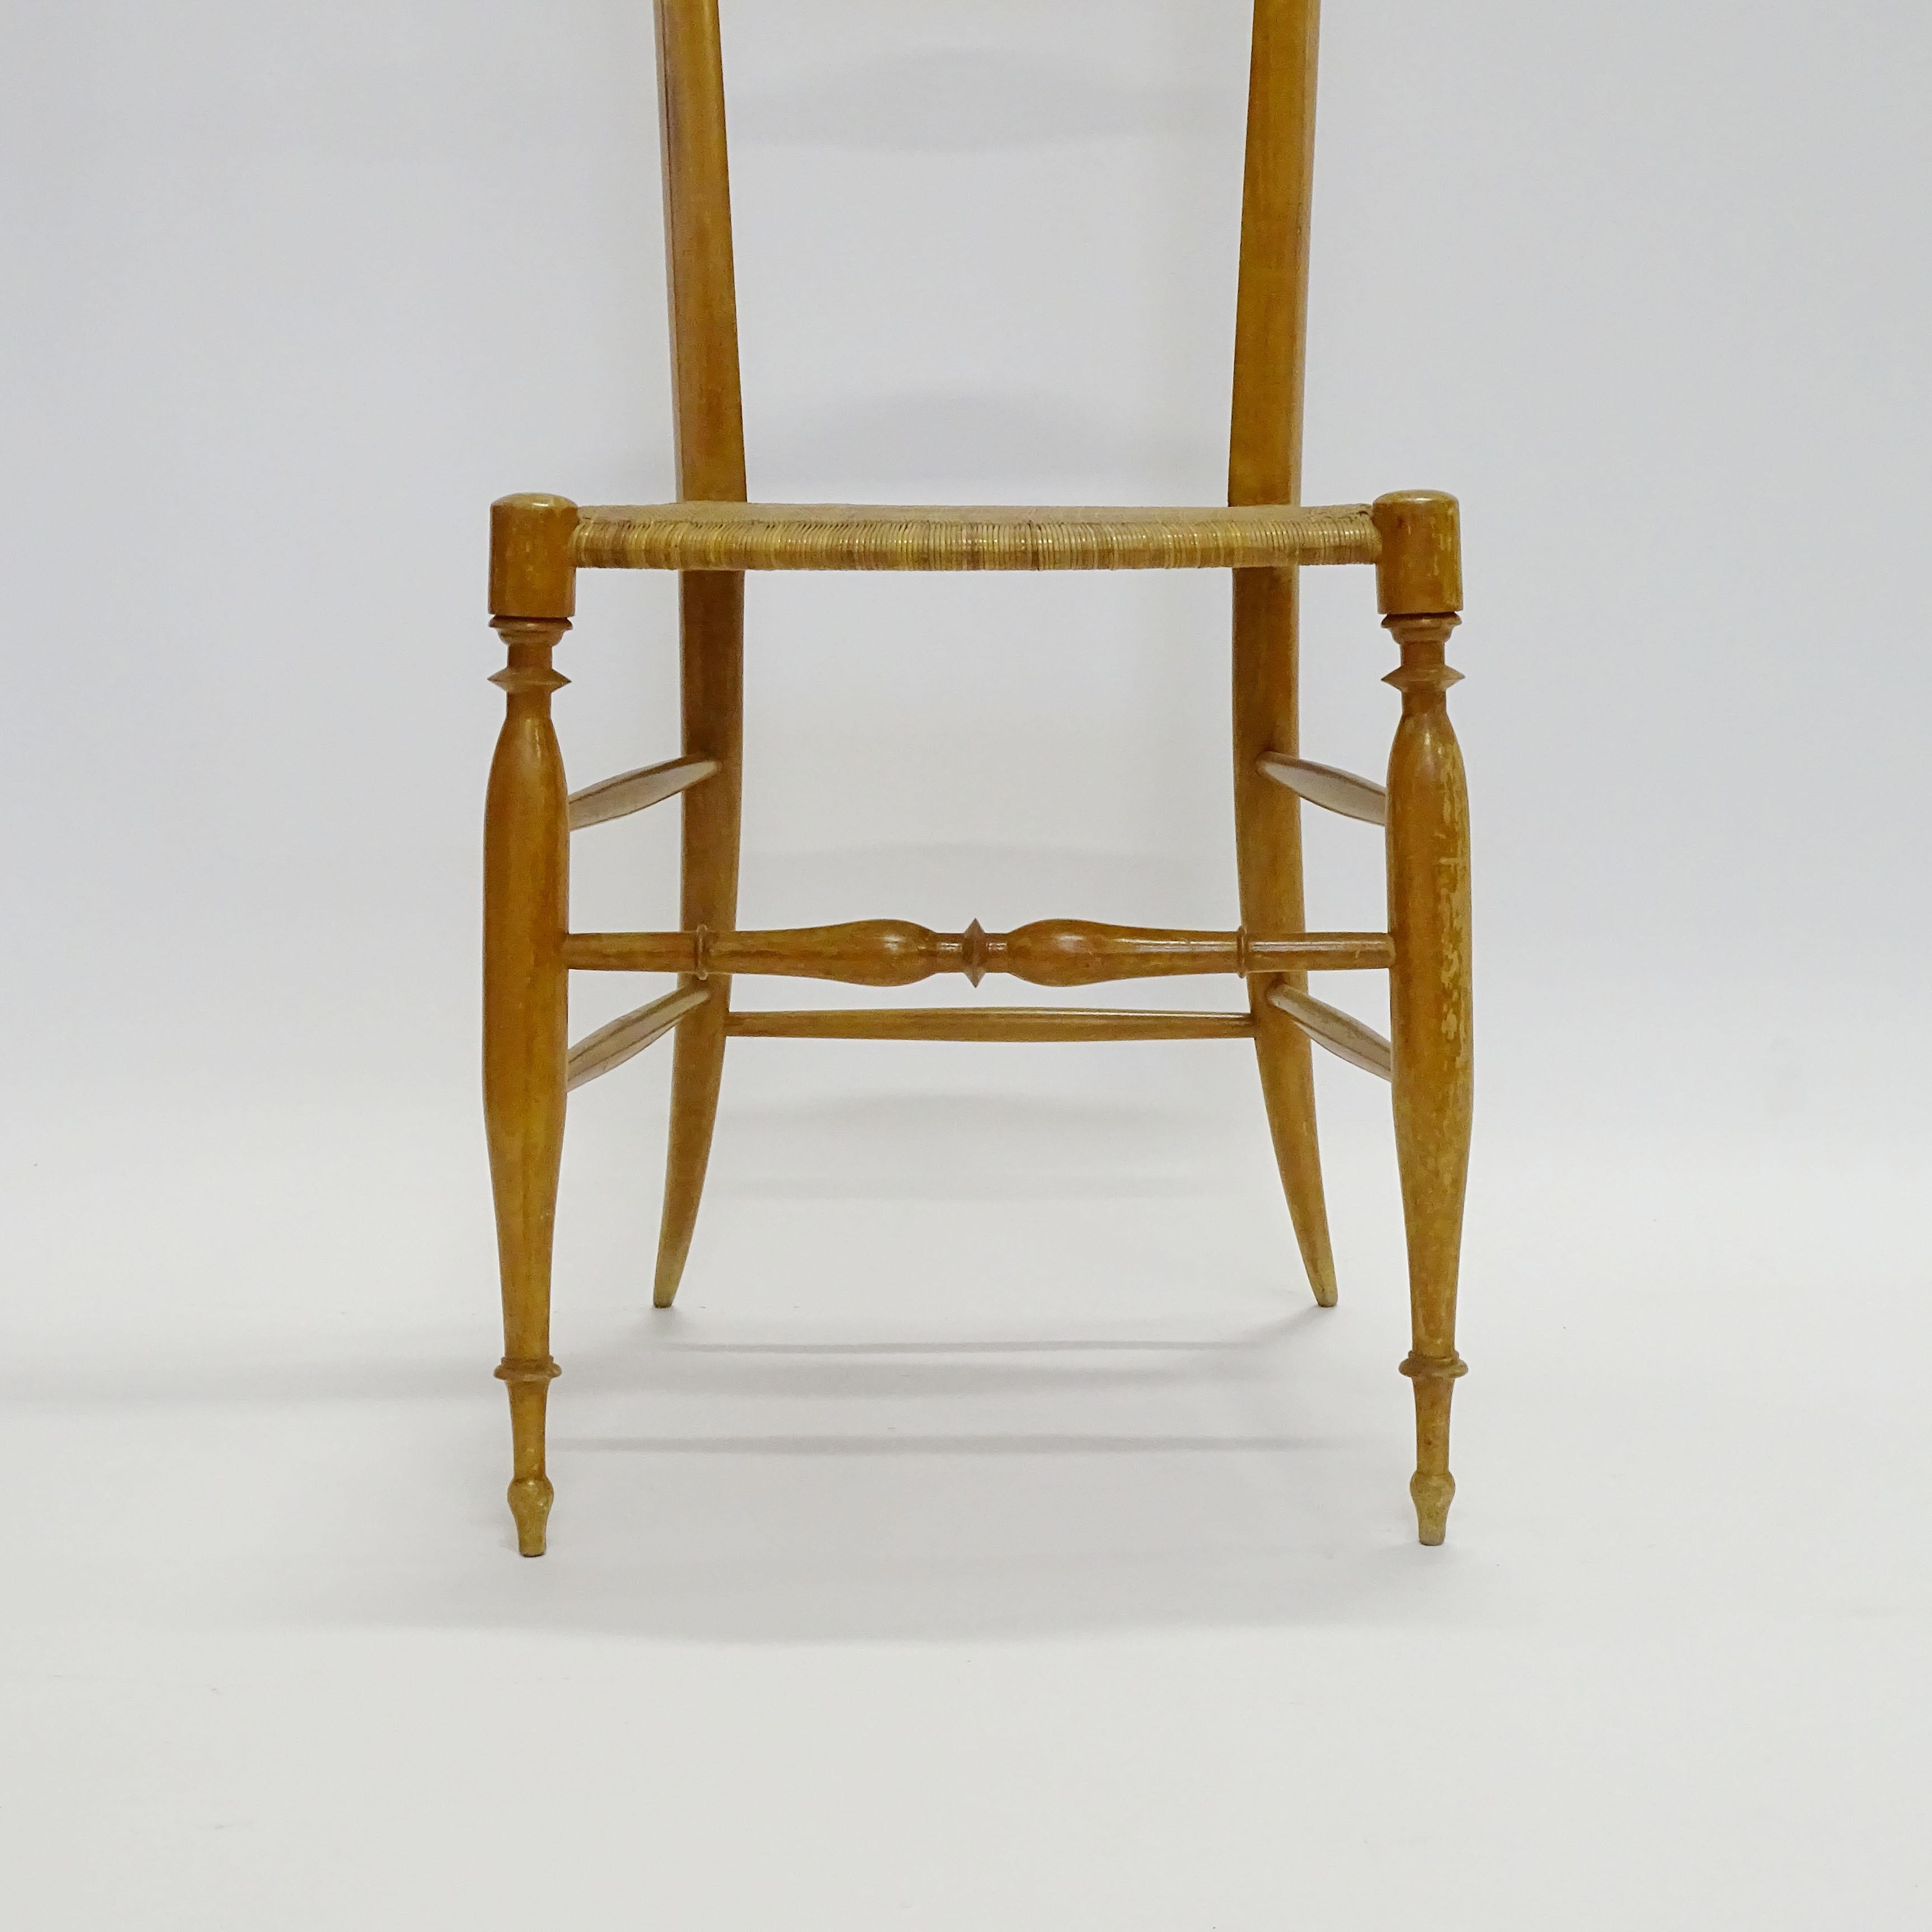 Unique and rare high back coat hanger Chiavari chair, Italy 1950s.